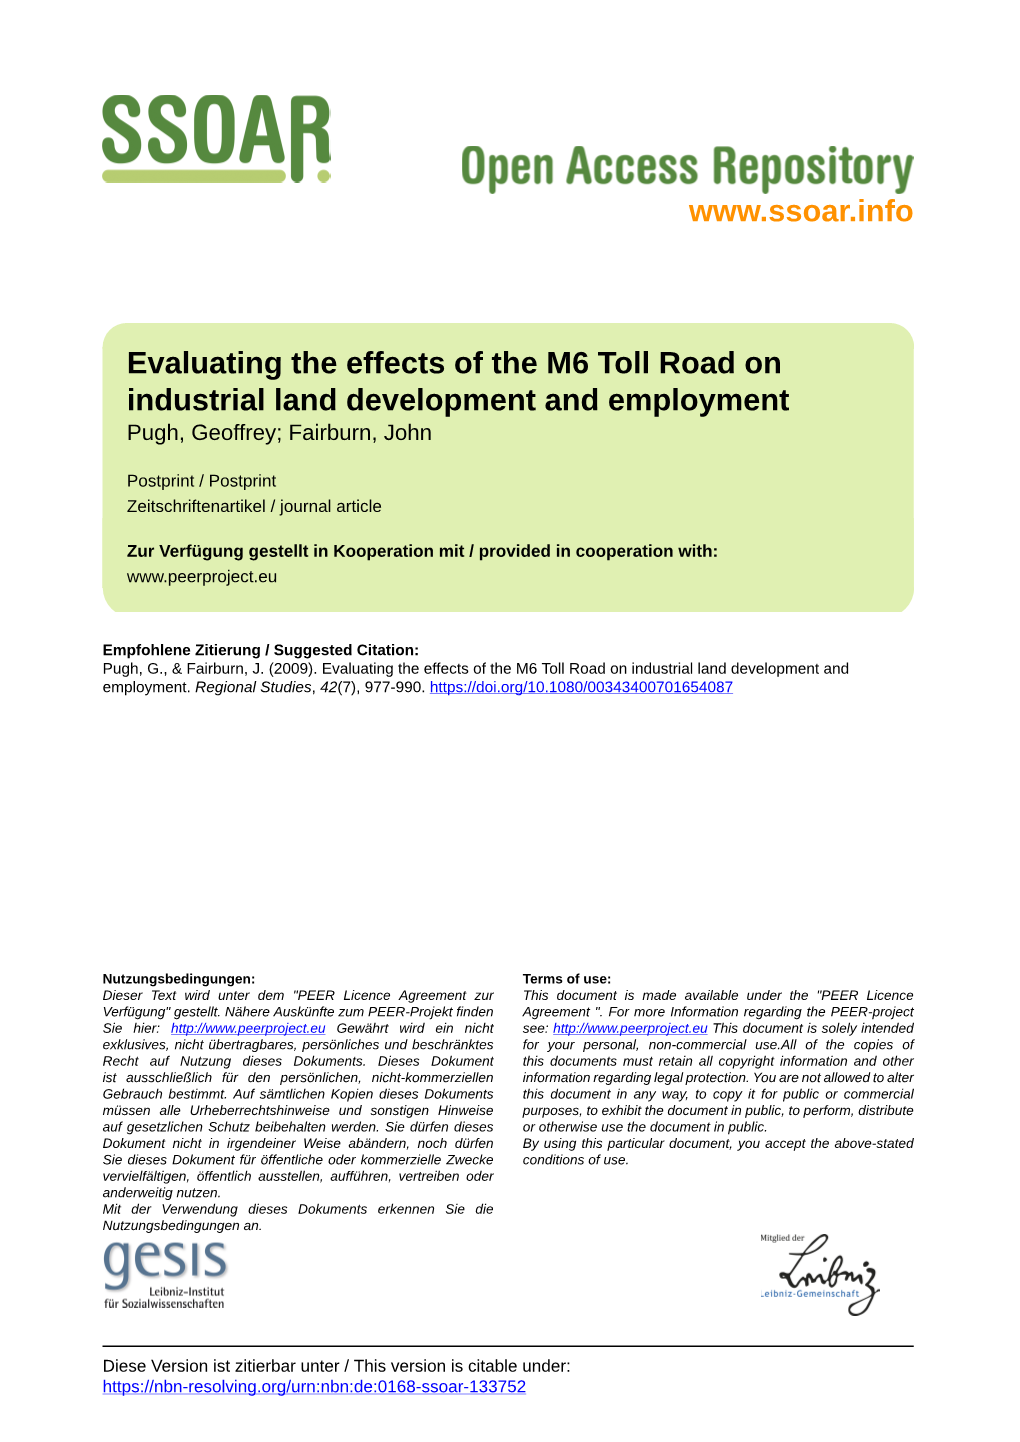 Evaluating the Effects of the M6 Toll Road on Industrial Land Development and Employment Pugh, Geoffrey; Fairburn, John